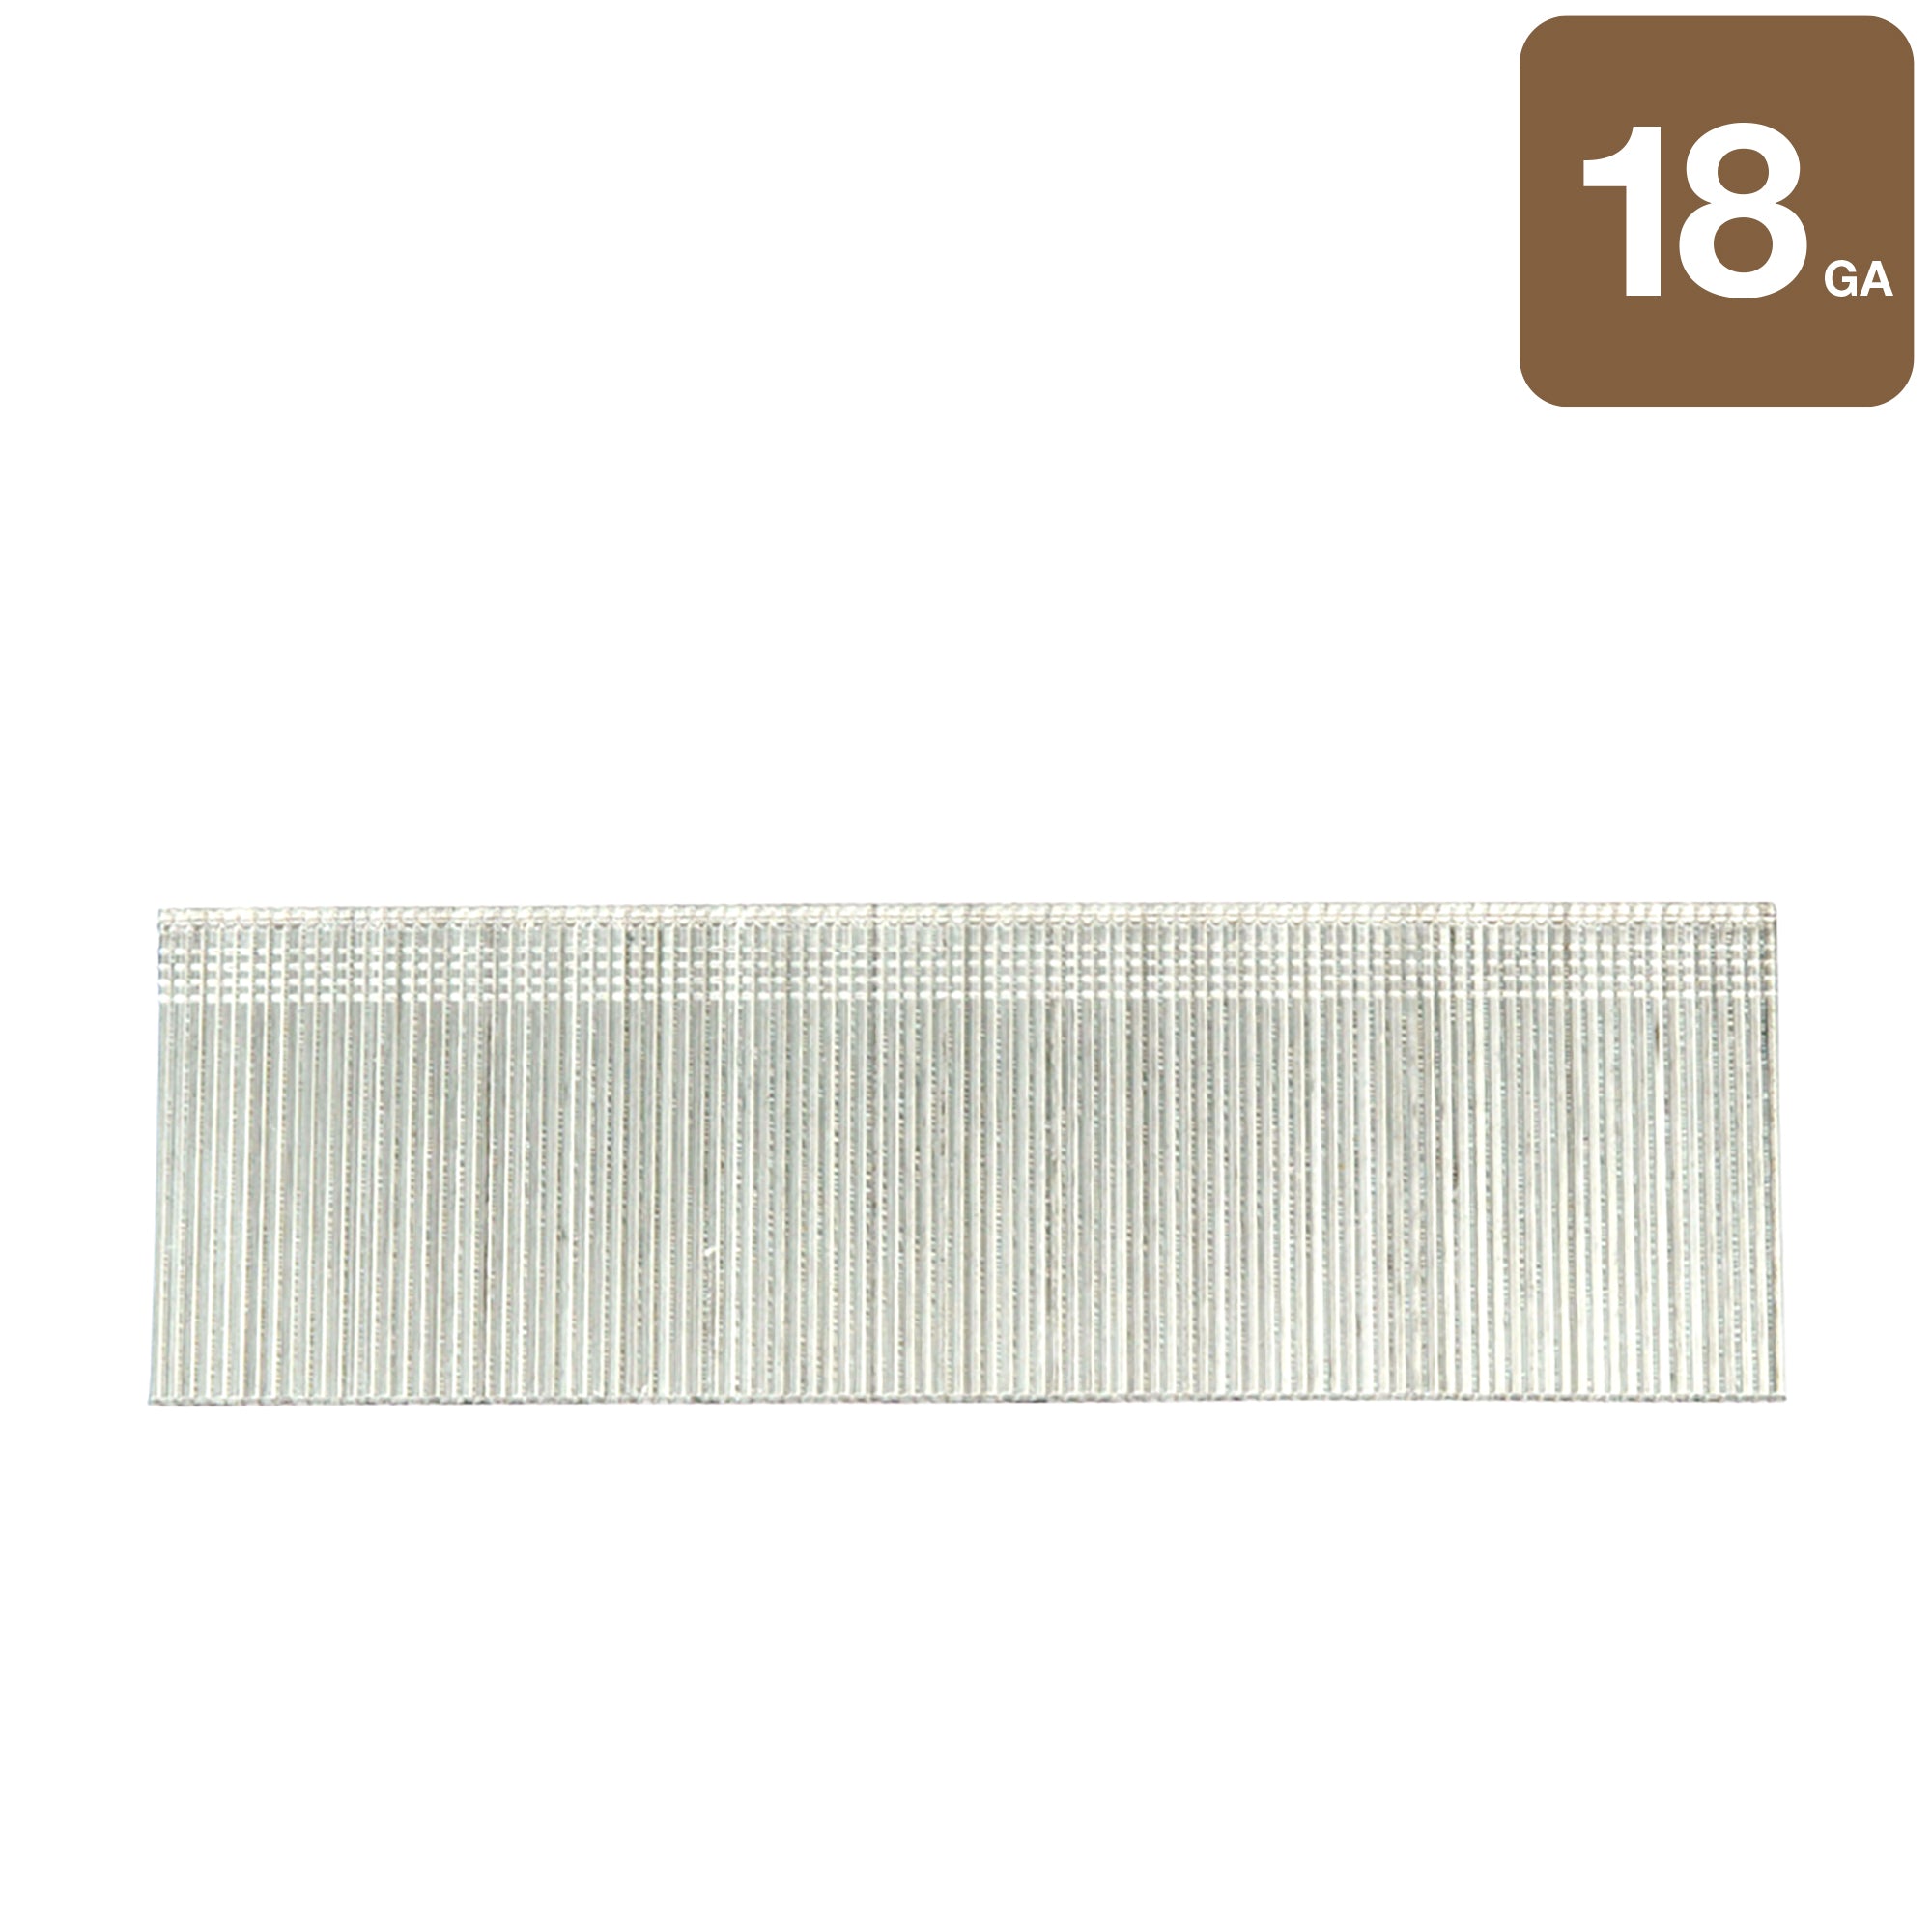 2 Inch 18 Gauge Brad Finish Nail 1,000 Count | 24108THPT